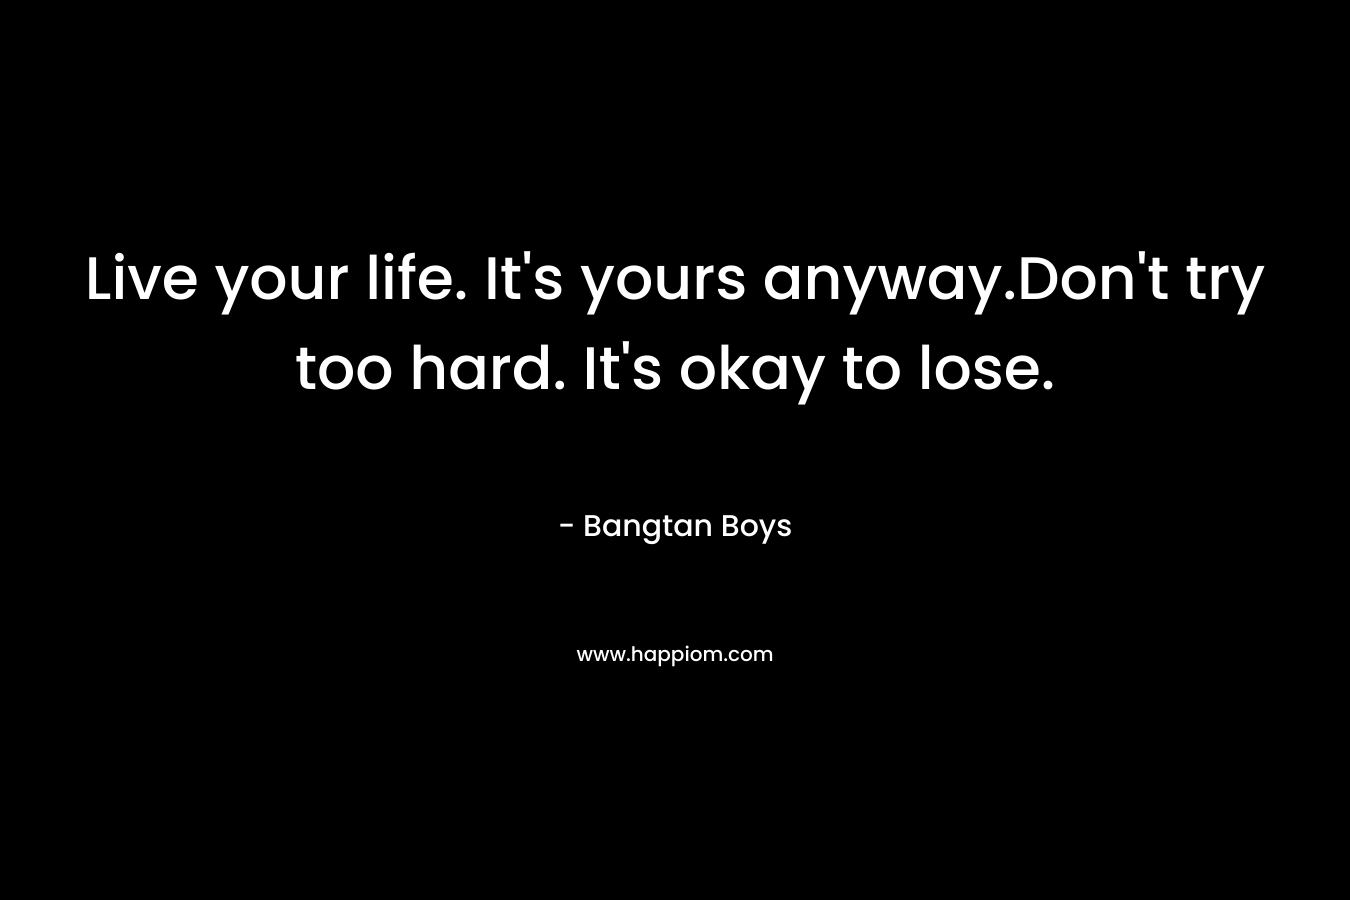 Live your life. It’s yours anyway.Don’t try too hard. It’s okay to lose. – Bangtan Boys